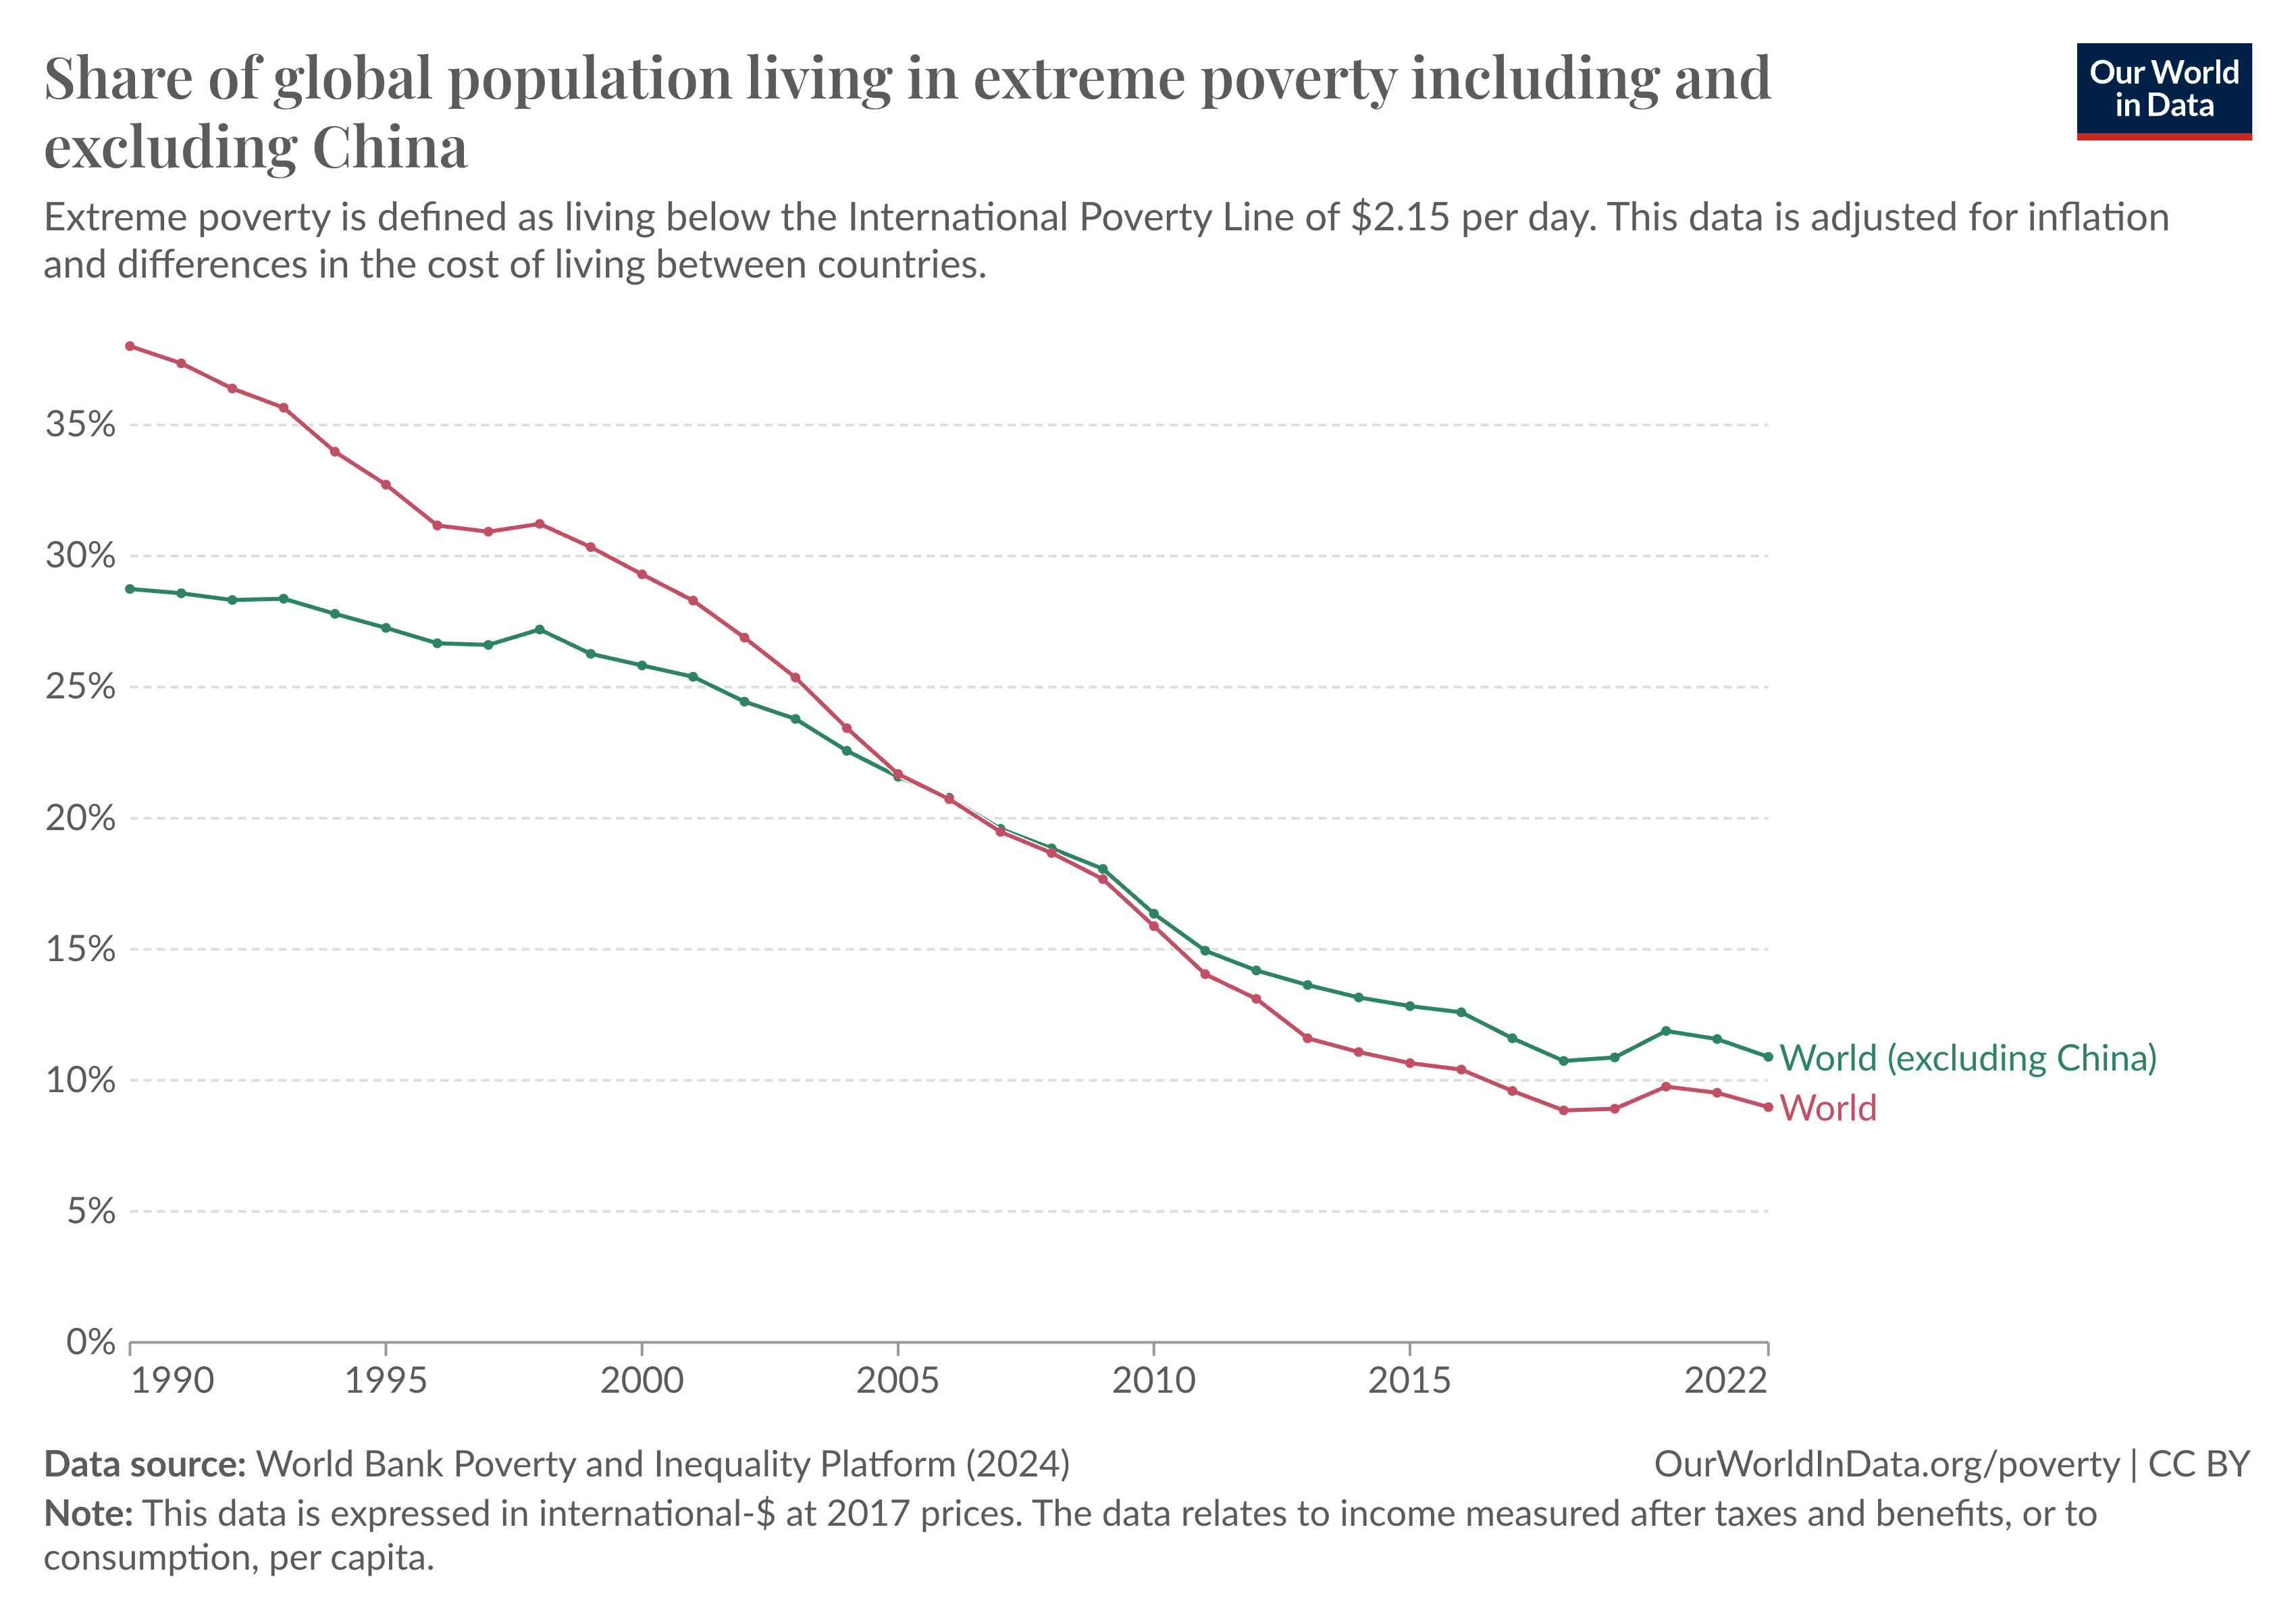 Line chart showing the decrease in the share in extreme poverty for both the world and the world without considering China